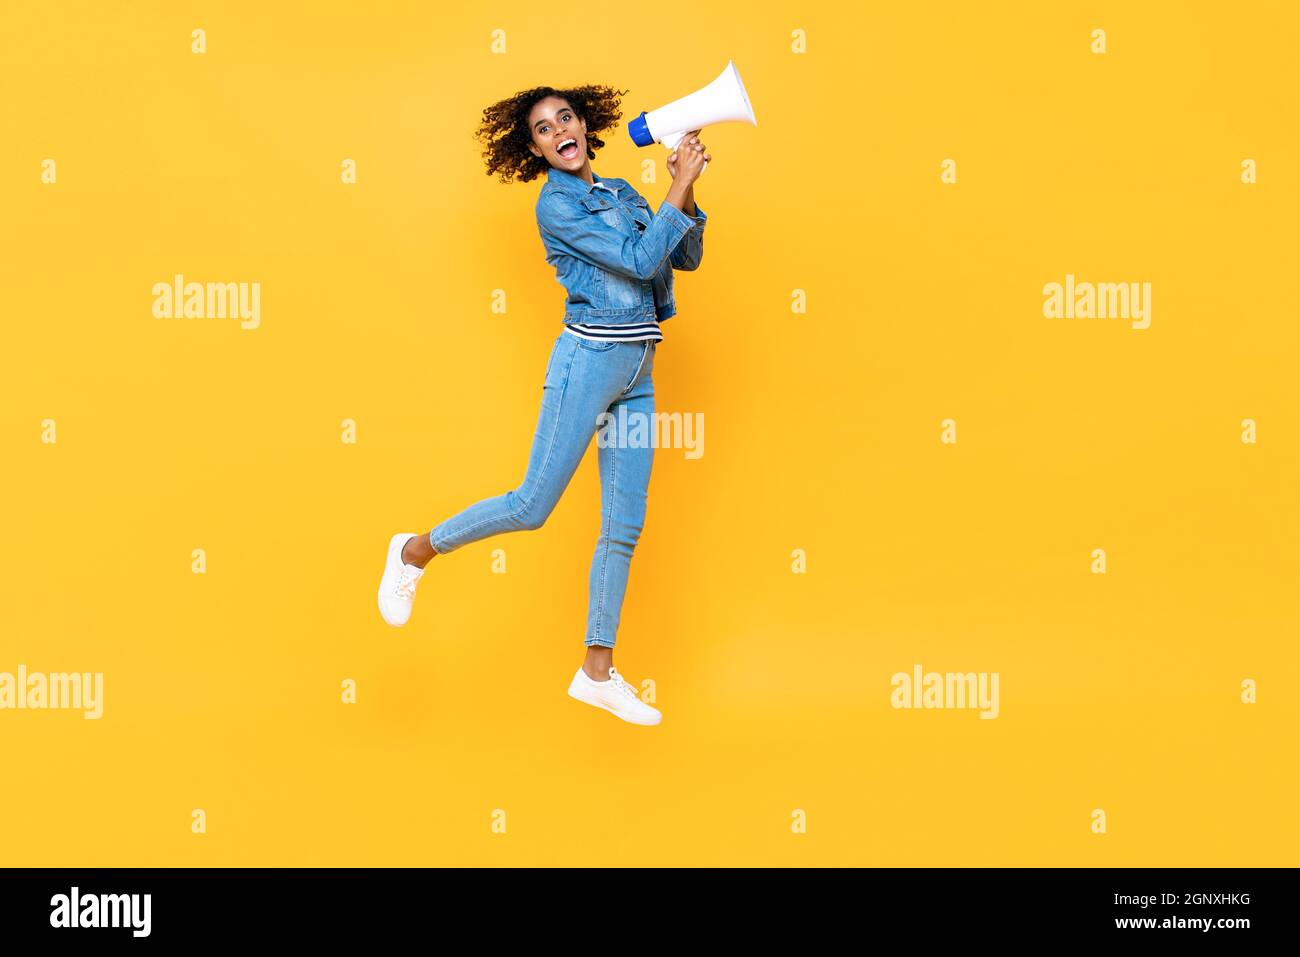 Cheerful young woman with megaphone jumping on yellow color studio background Stock Photo